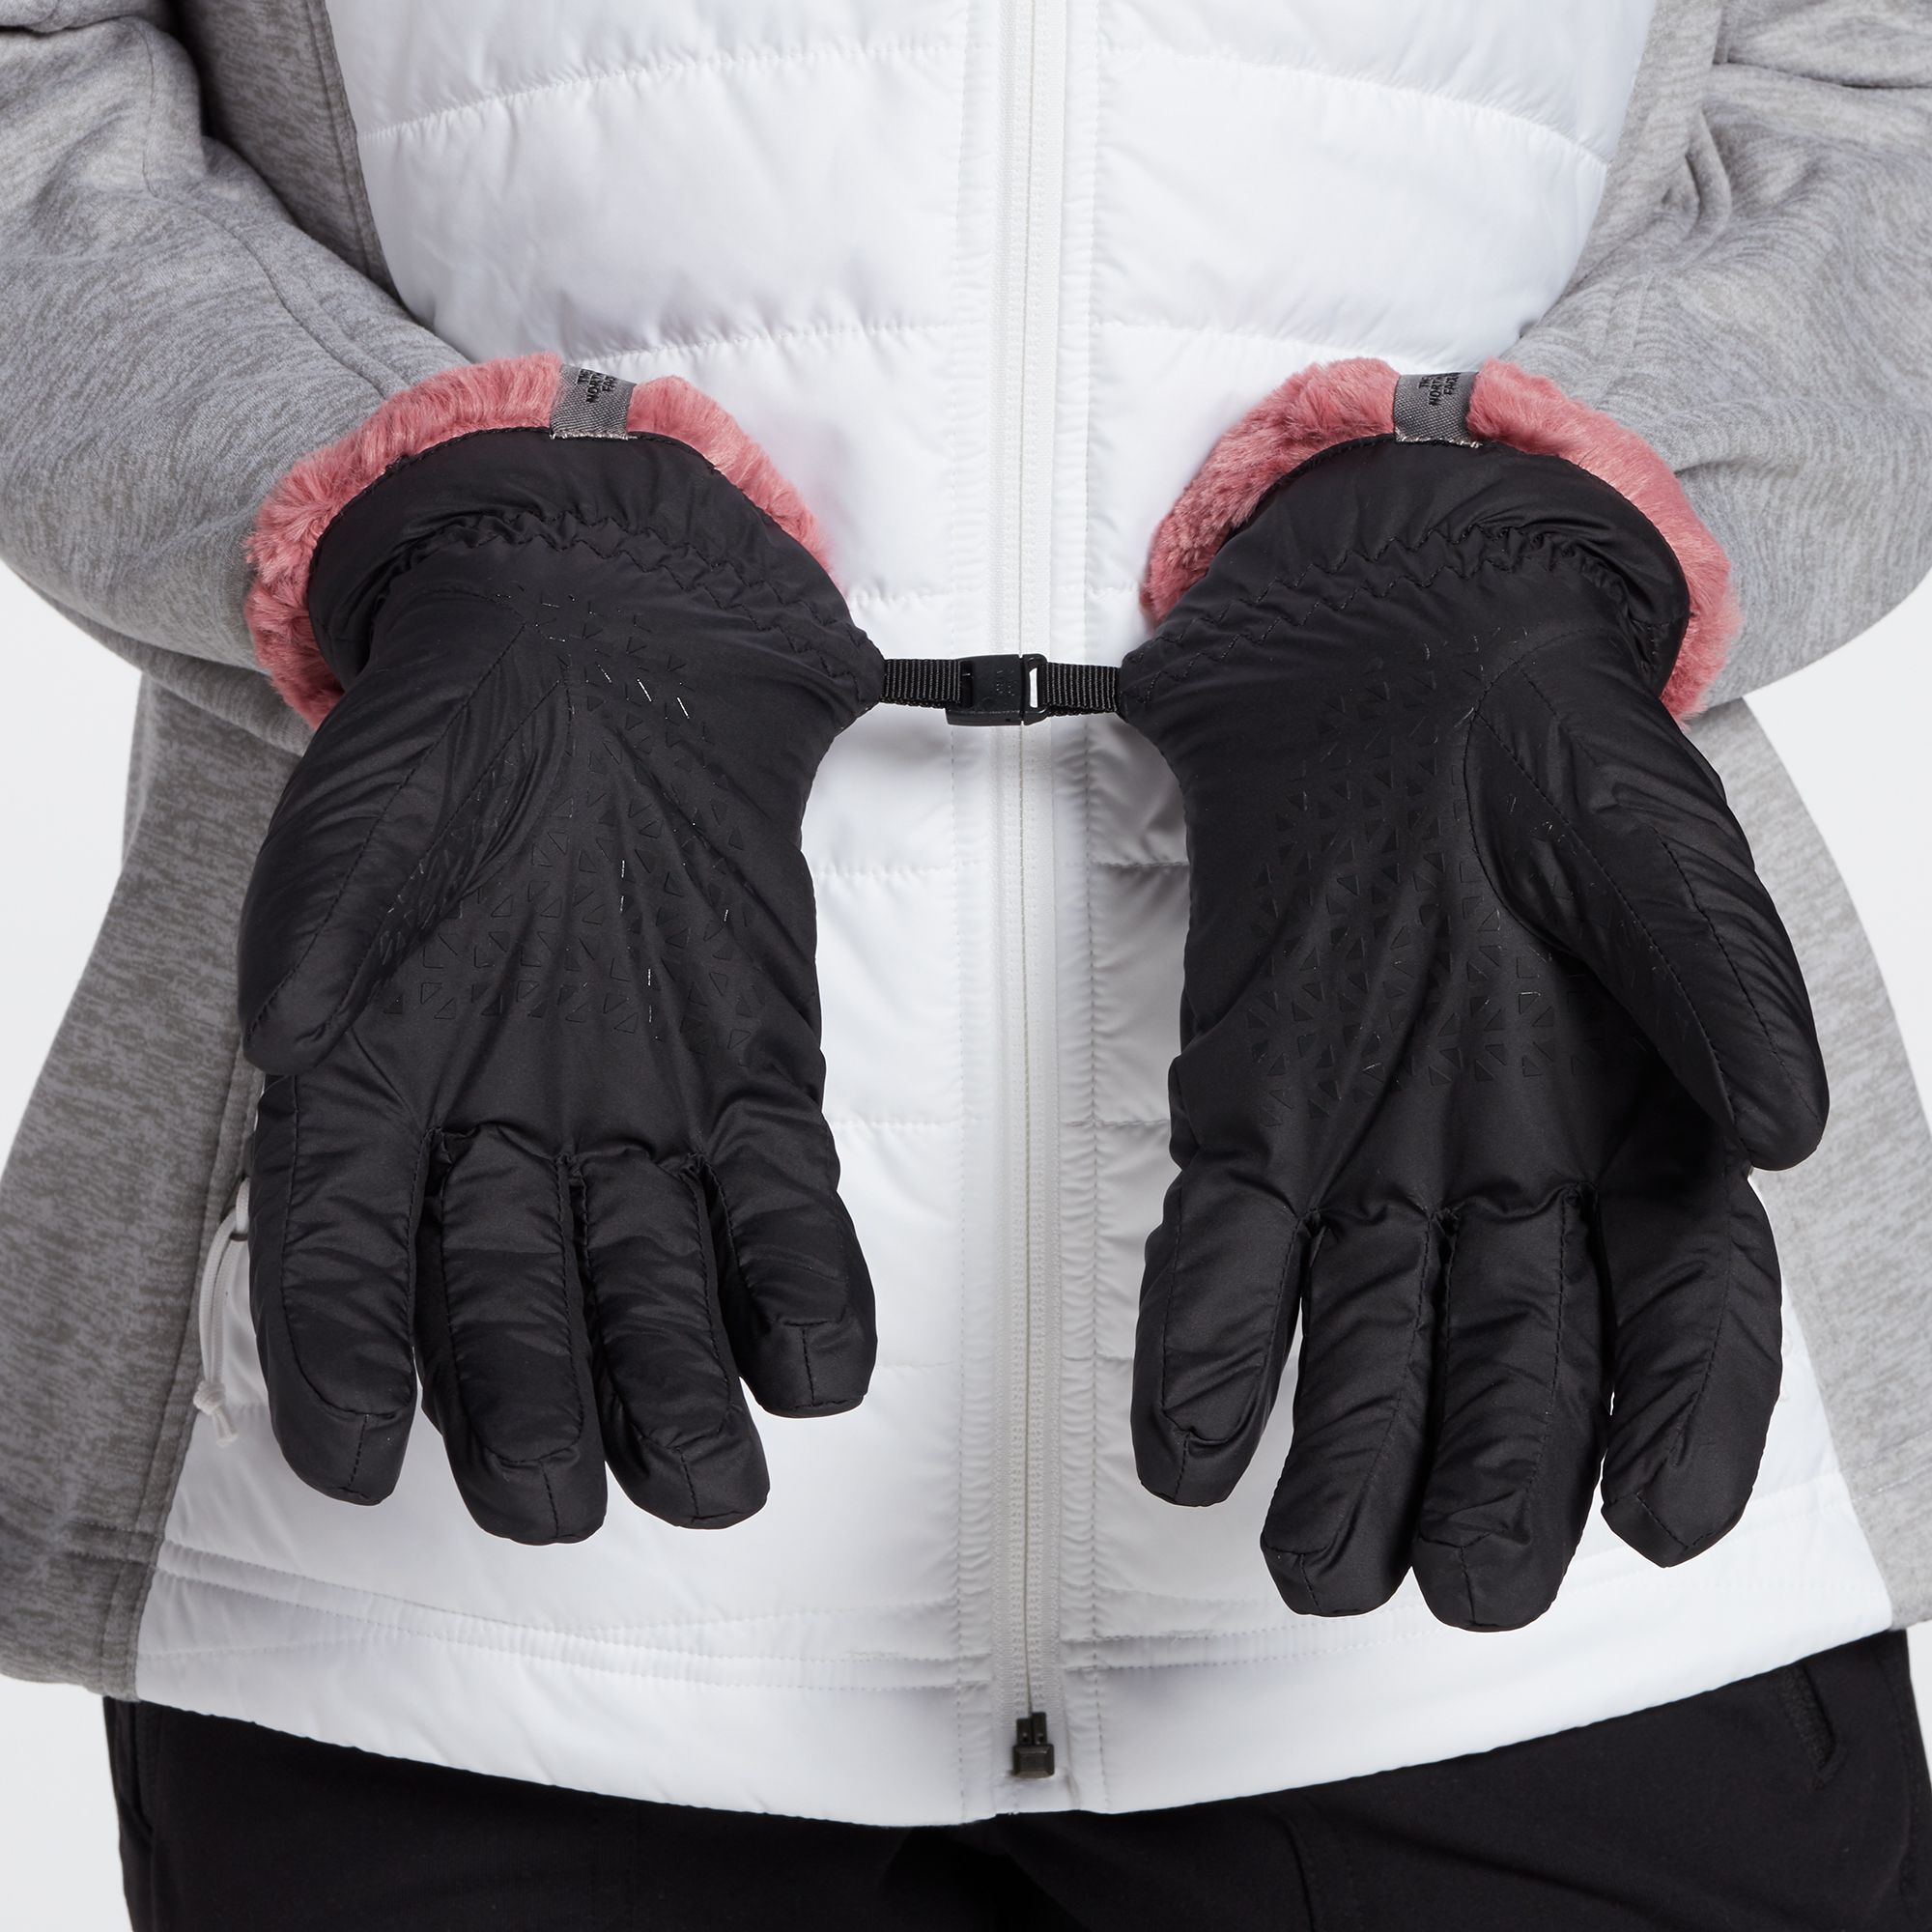 north face women's mossbud gloves